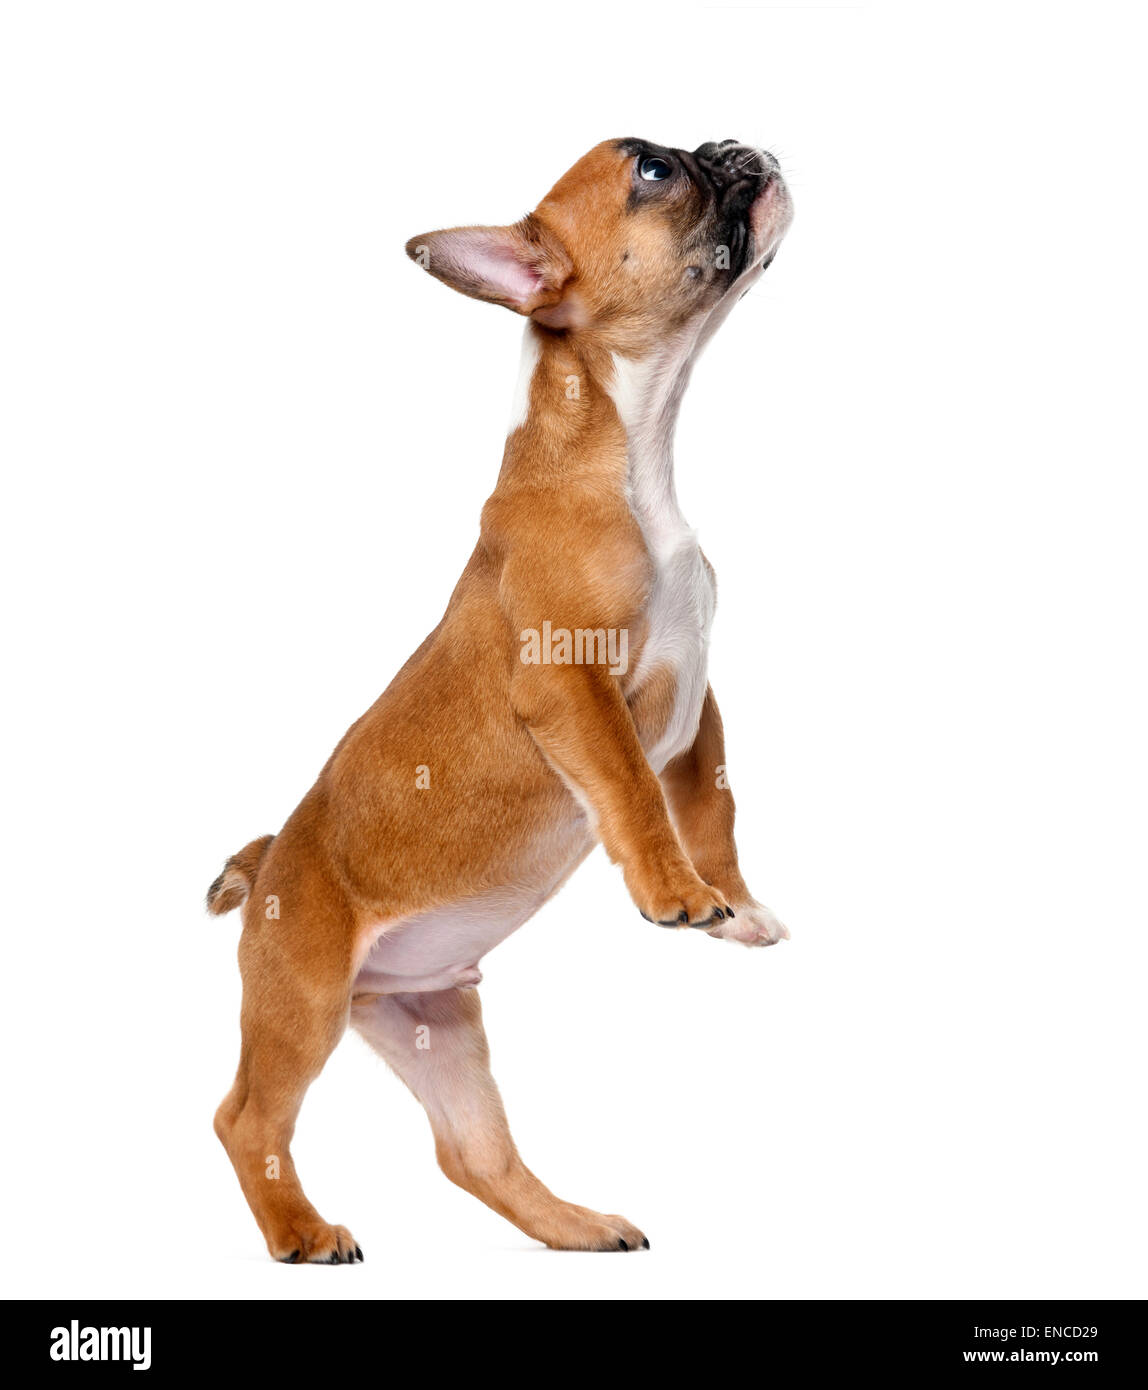 French bulldog puppy standing in front of a white background Stock Photo